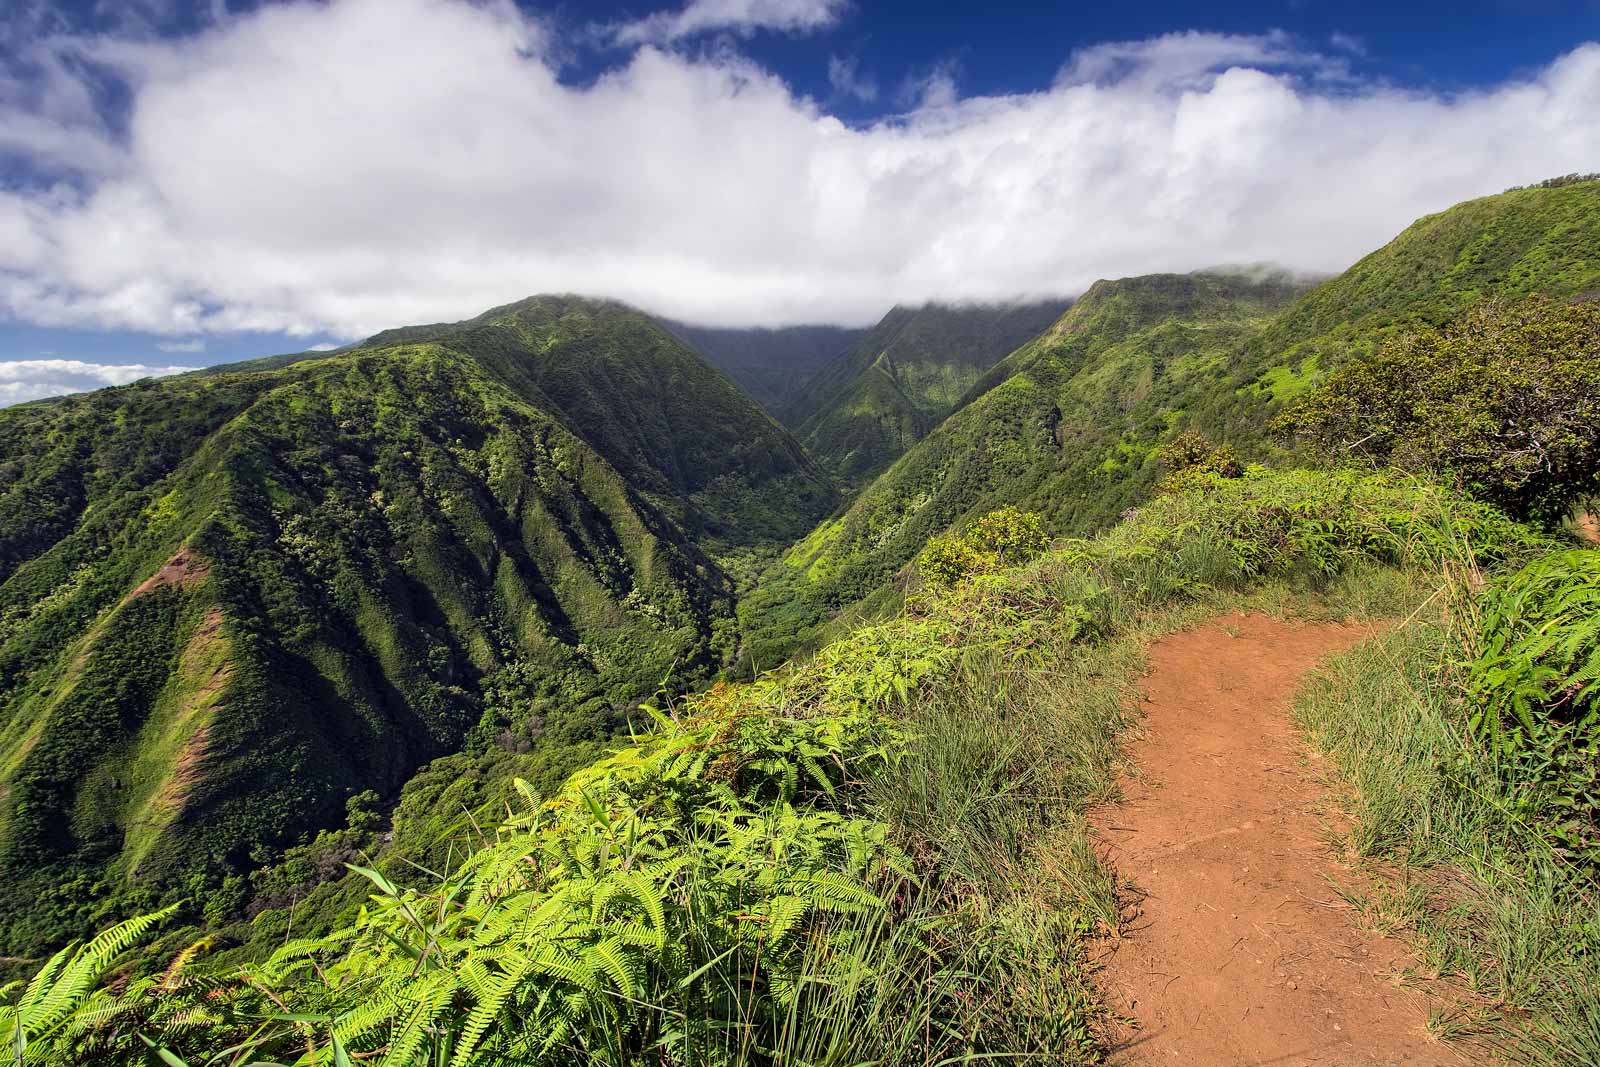 Places to stay in Maui Upcountry